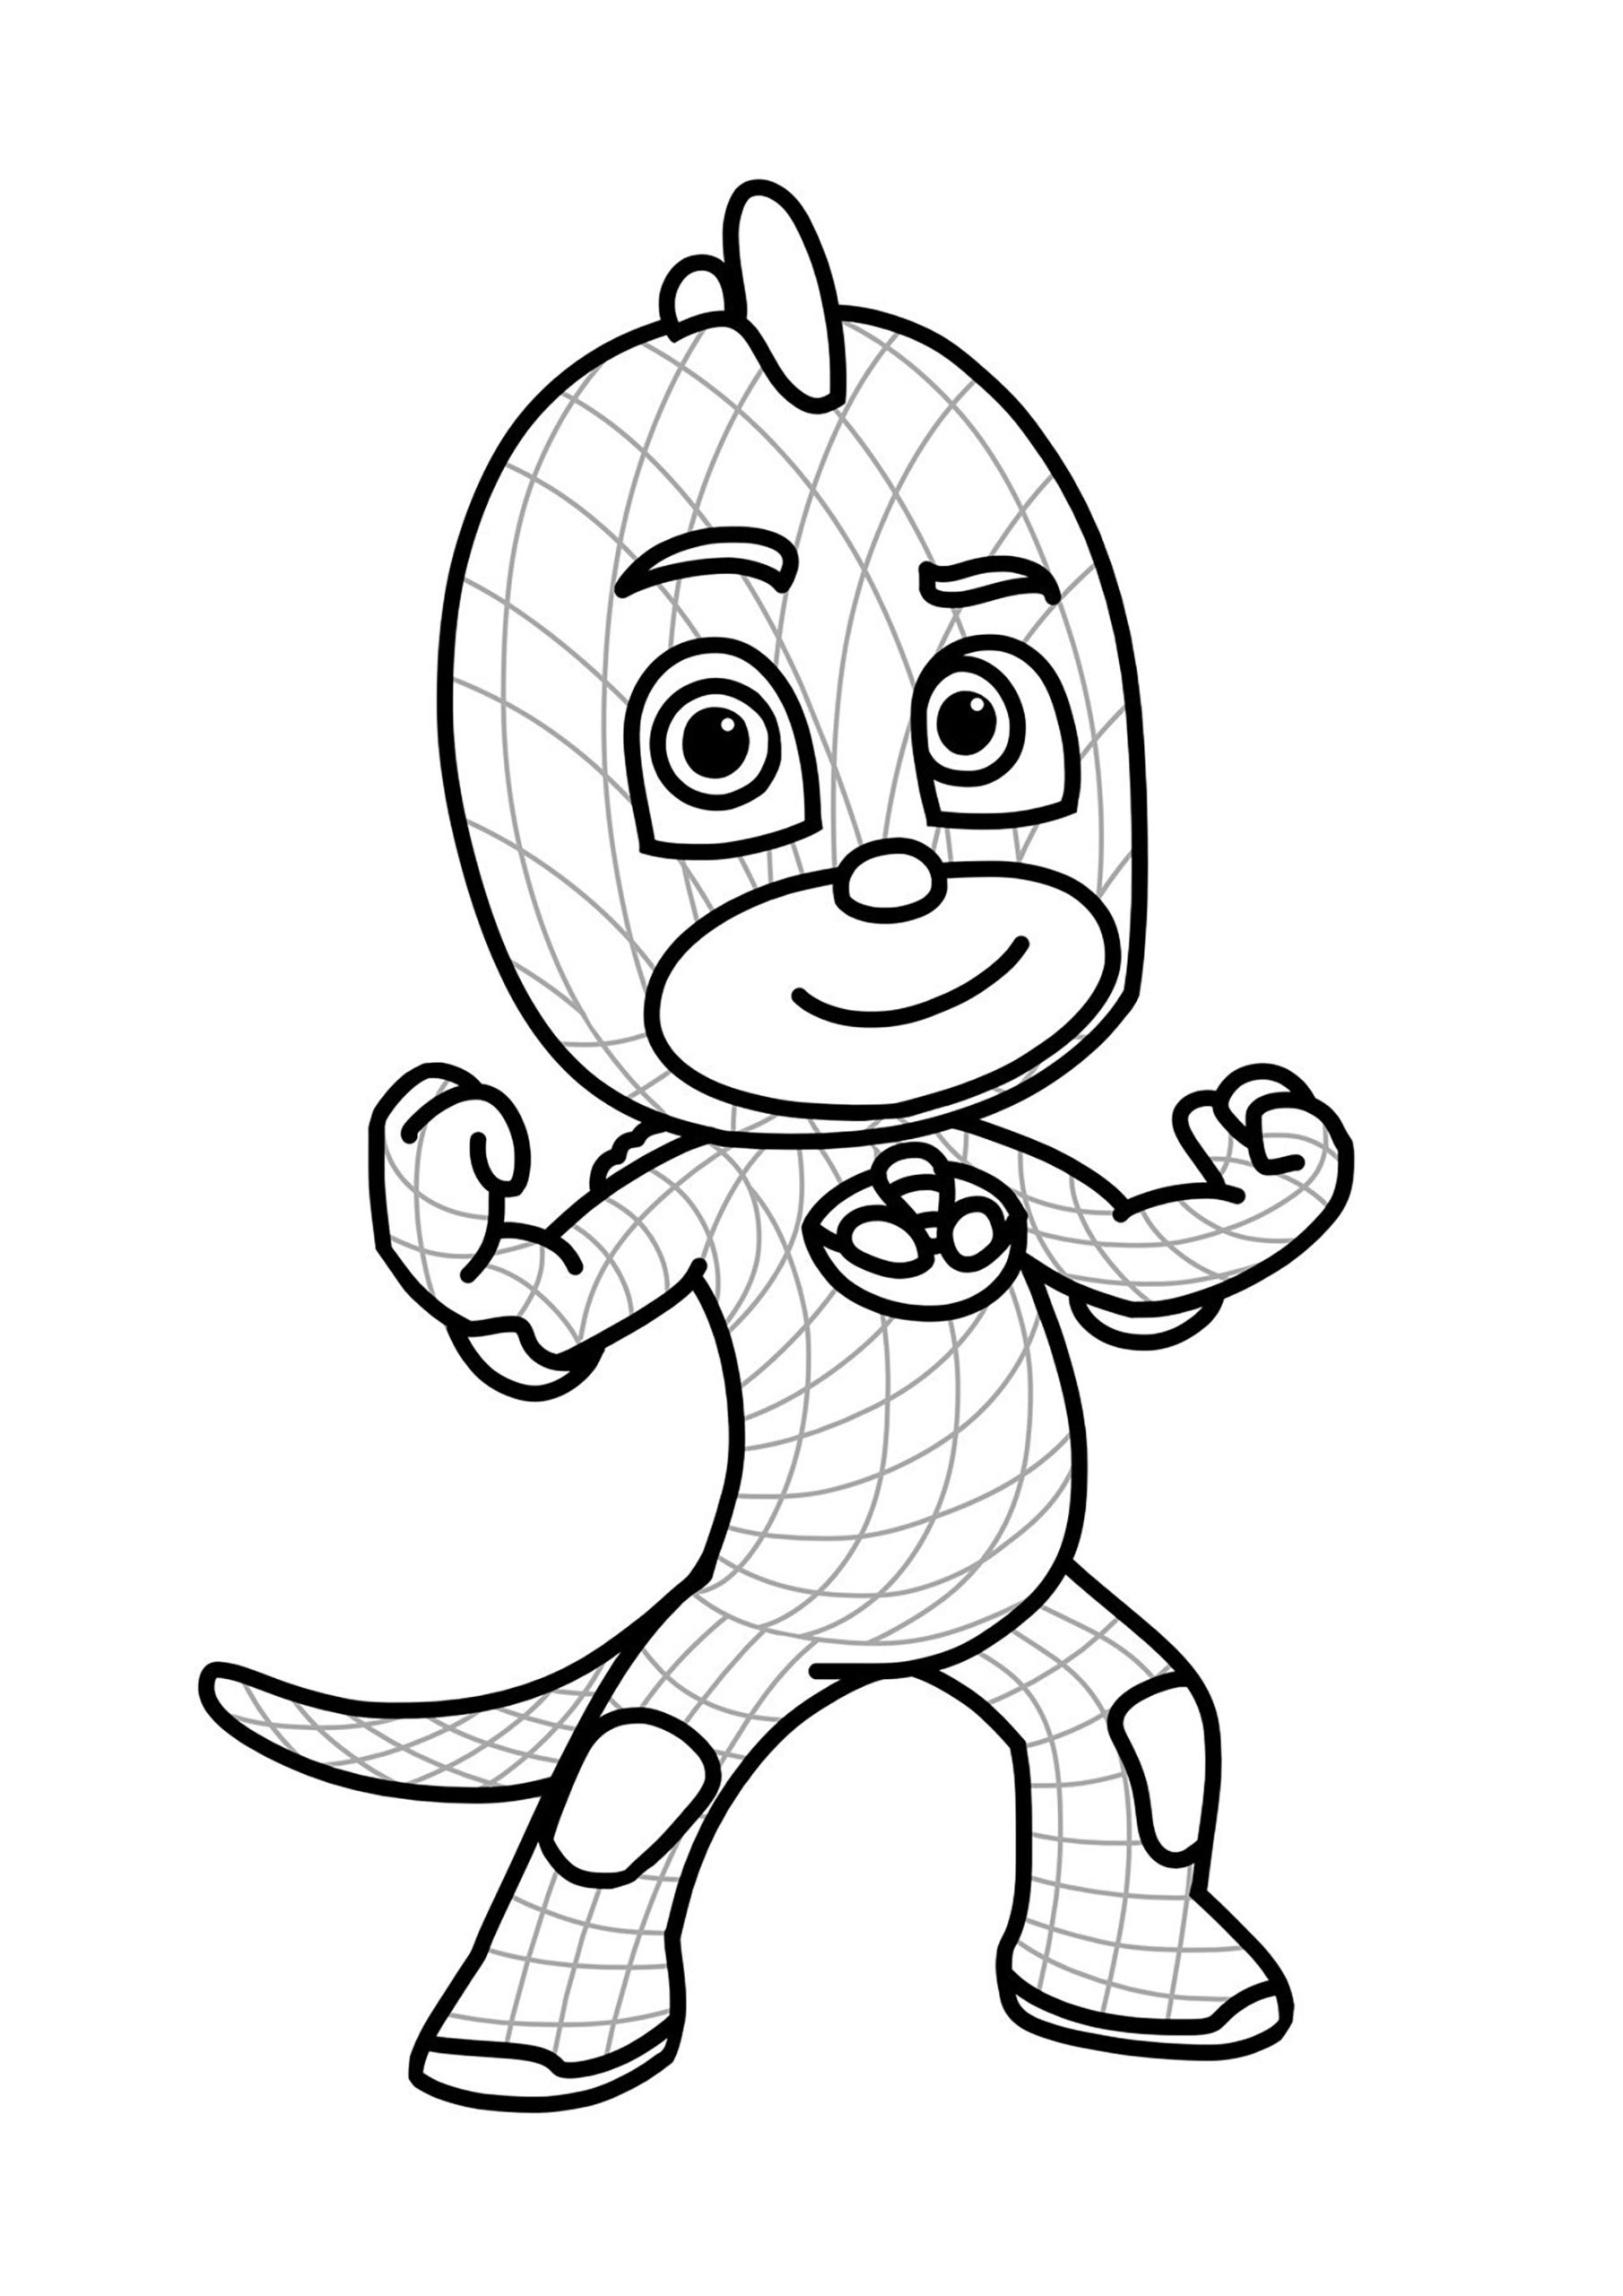 Coloring Pages : Pj Masks Free To Color For Children Kids Coloring ...